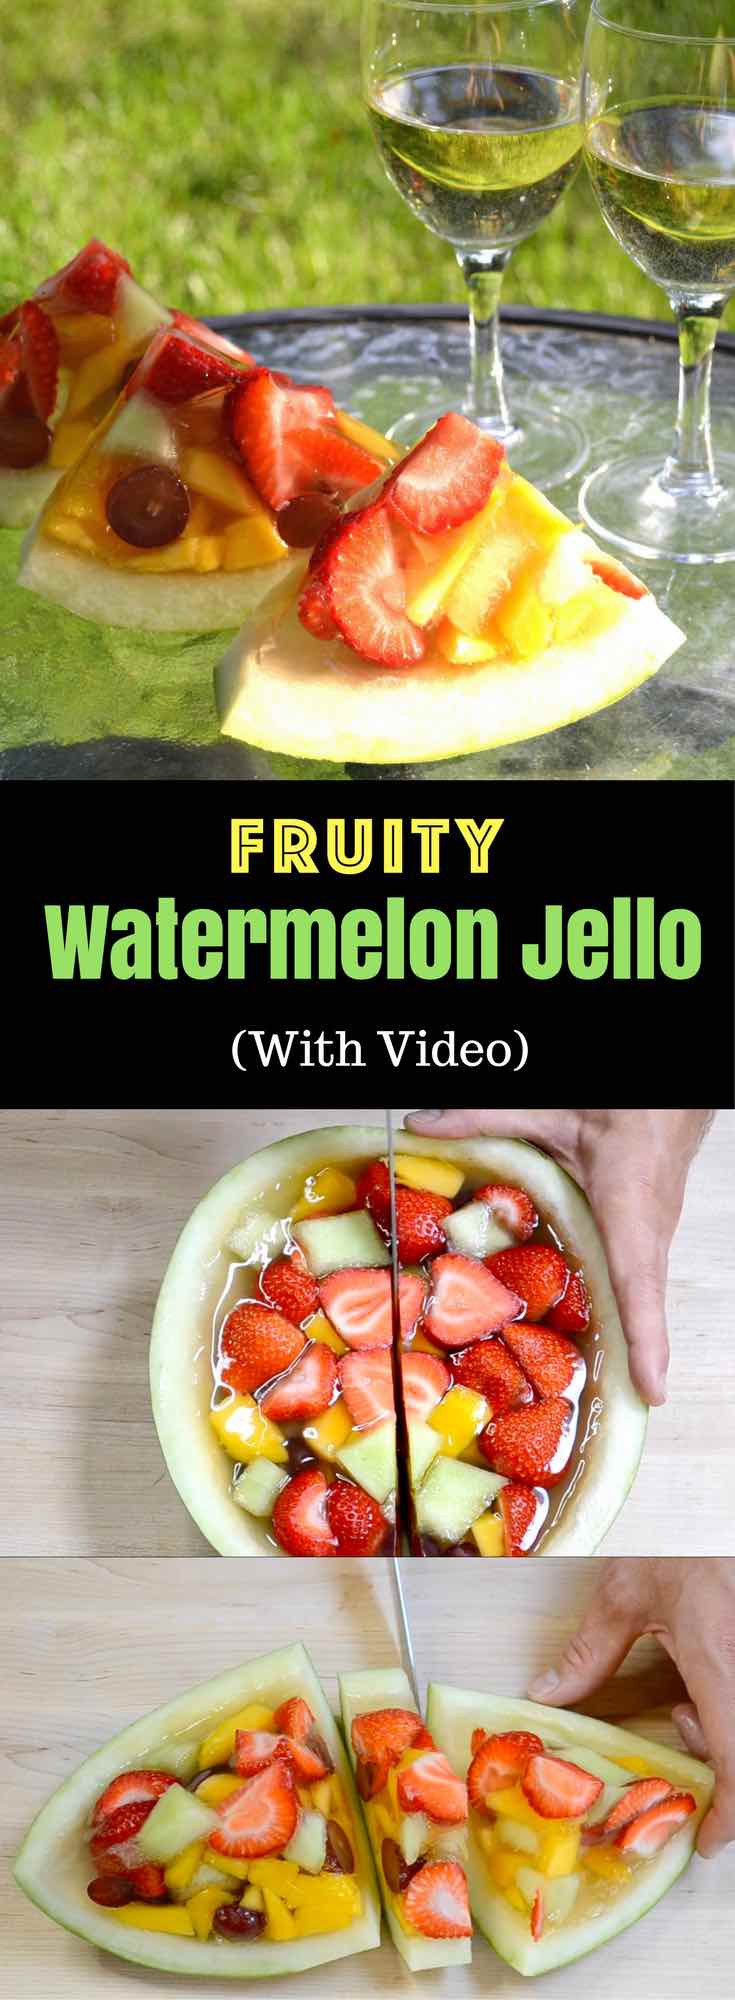 Best Watermelon Jello Shots – The most refreshing and delicious jello shots with no added sugar! All you need is some simple ingredients: watermelon, mango, strawberries, melon, rum and gelatin. No bake recipe that's easy to make. Video recipe. | Tipbuzz.com